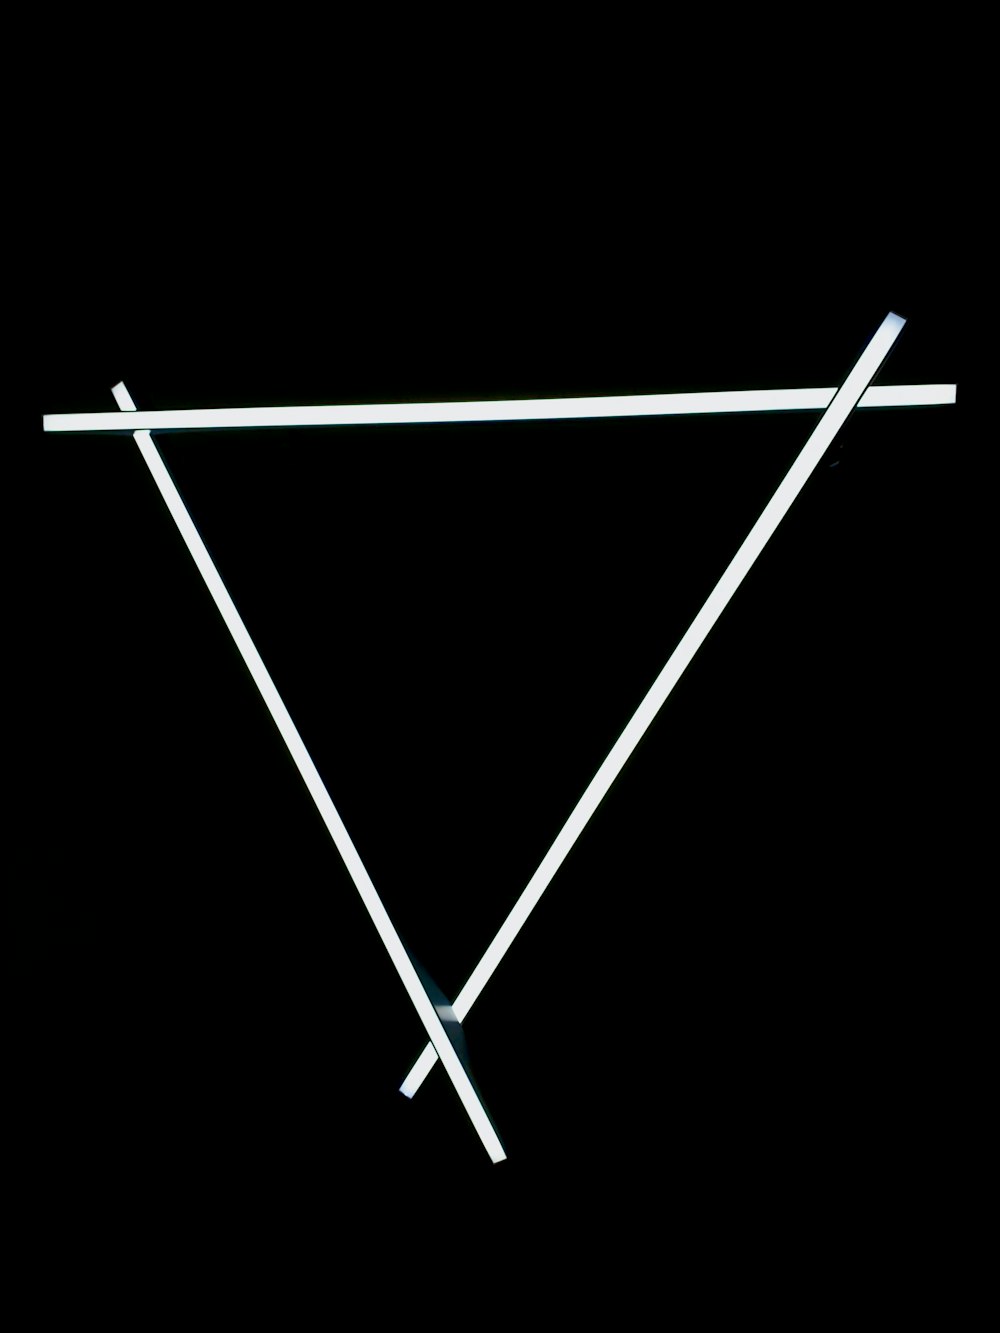 a black background with a white triangle and two white sticks